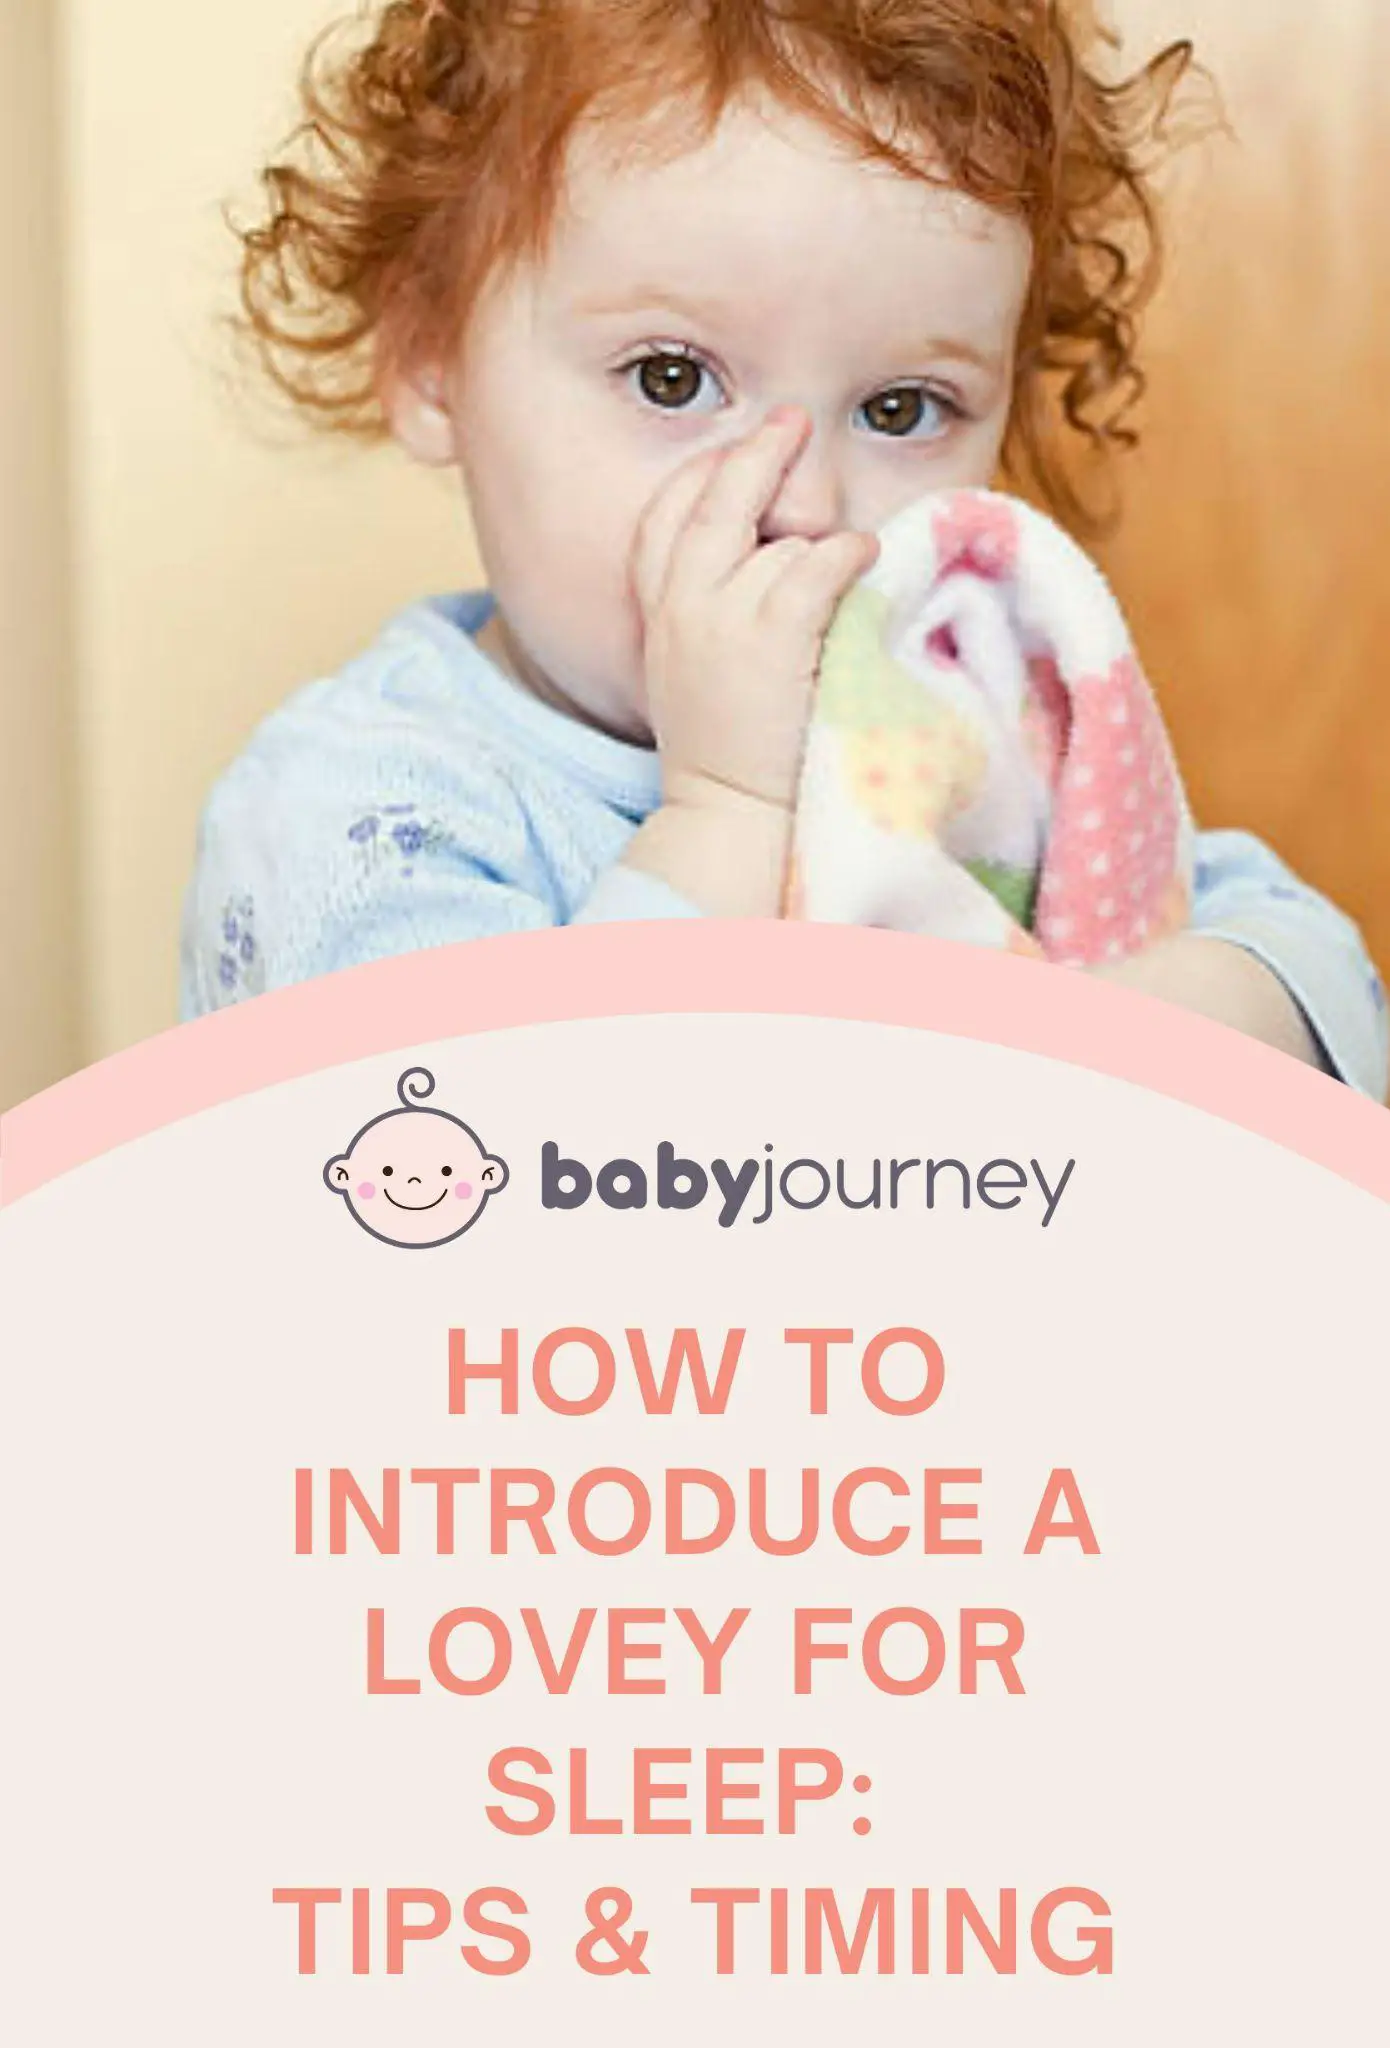 How to Introduce a Lovey for Sleep: Tips and Timing Pinterest Image - Baby Journey 